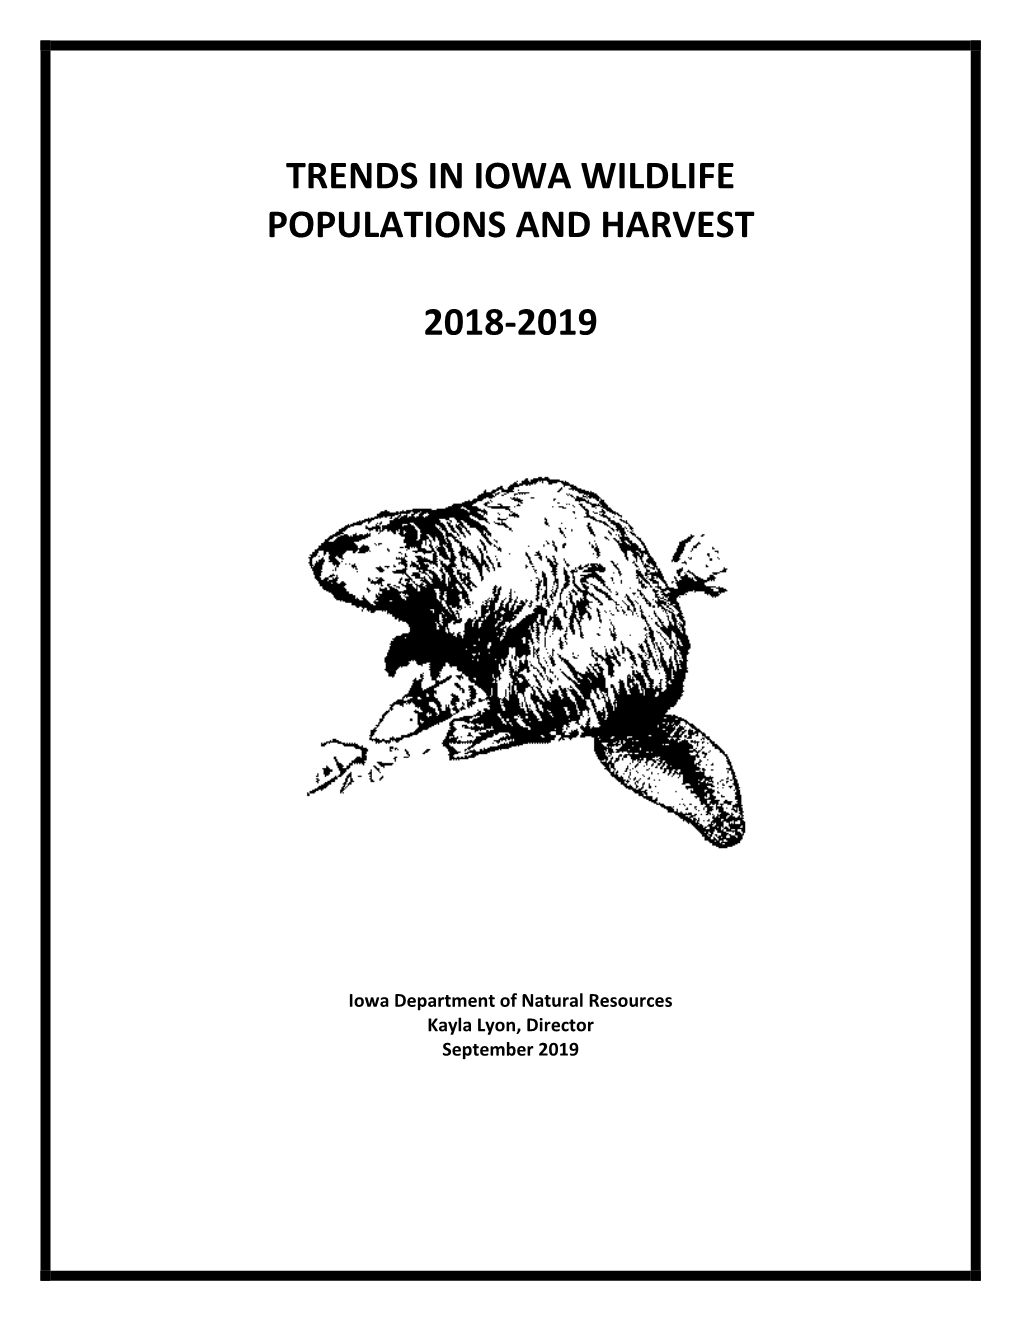 Status and Trends in Wildlife Populations 2019